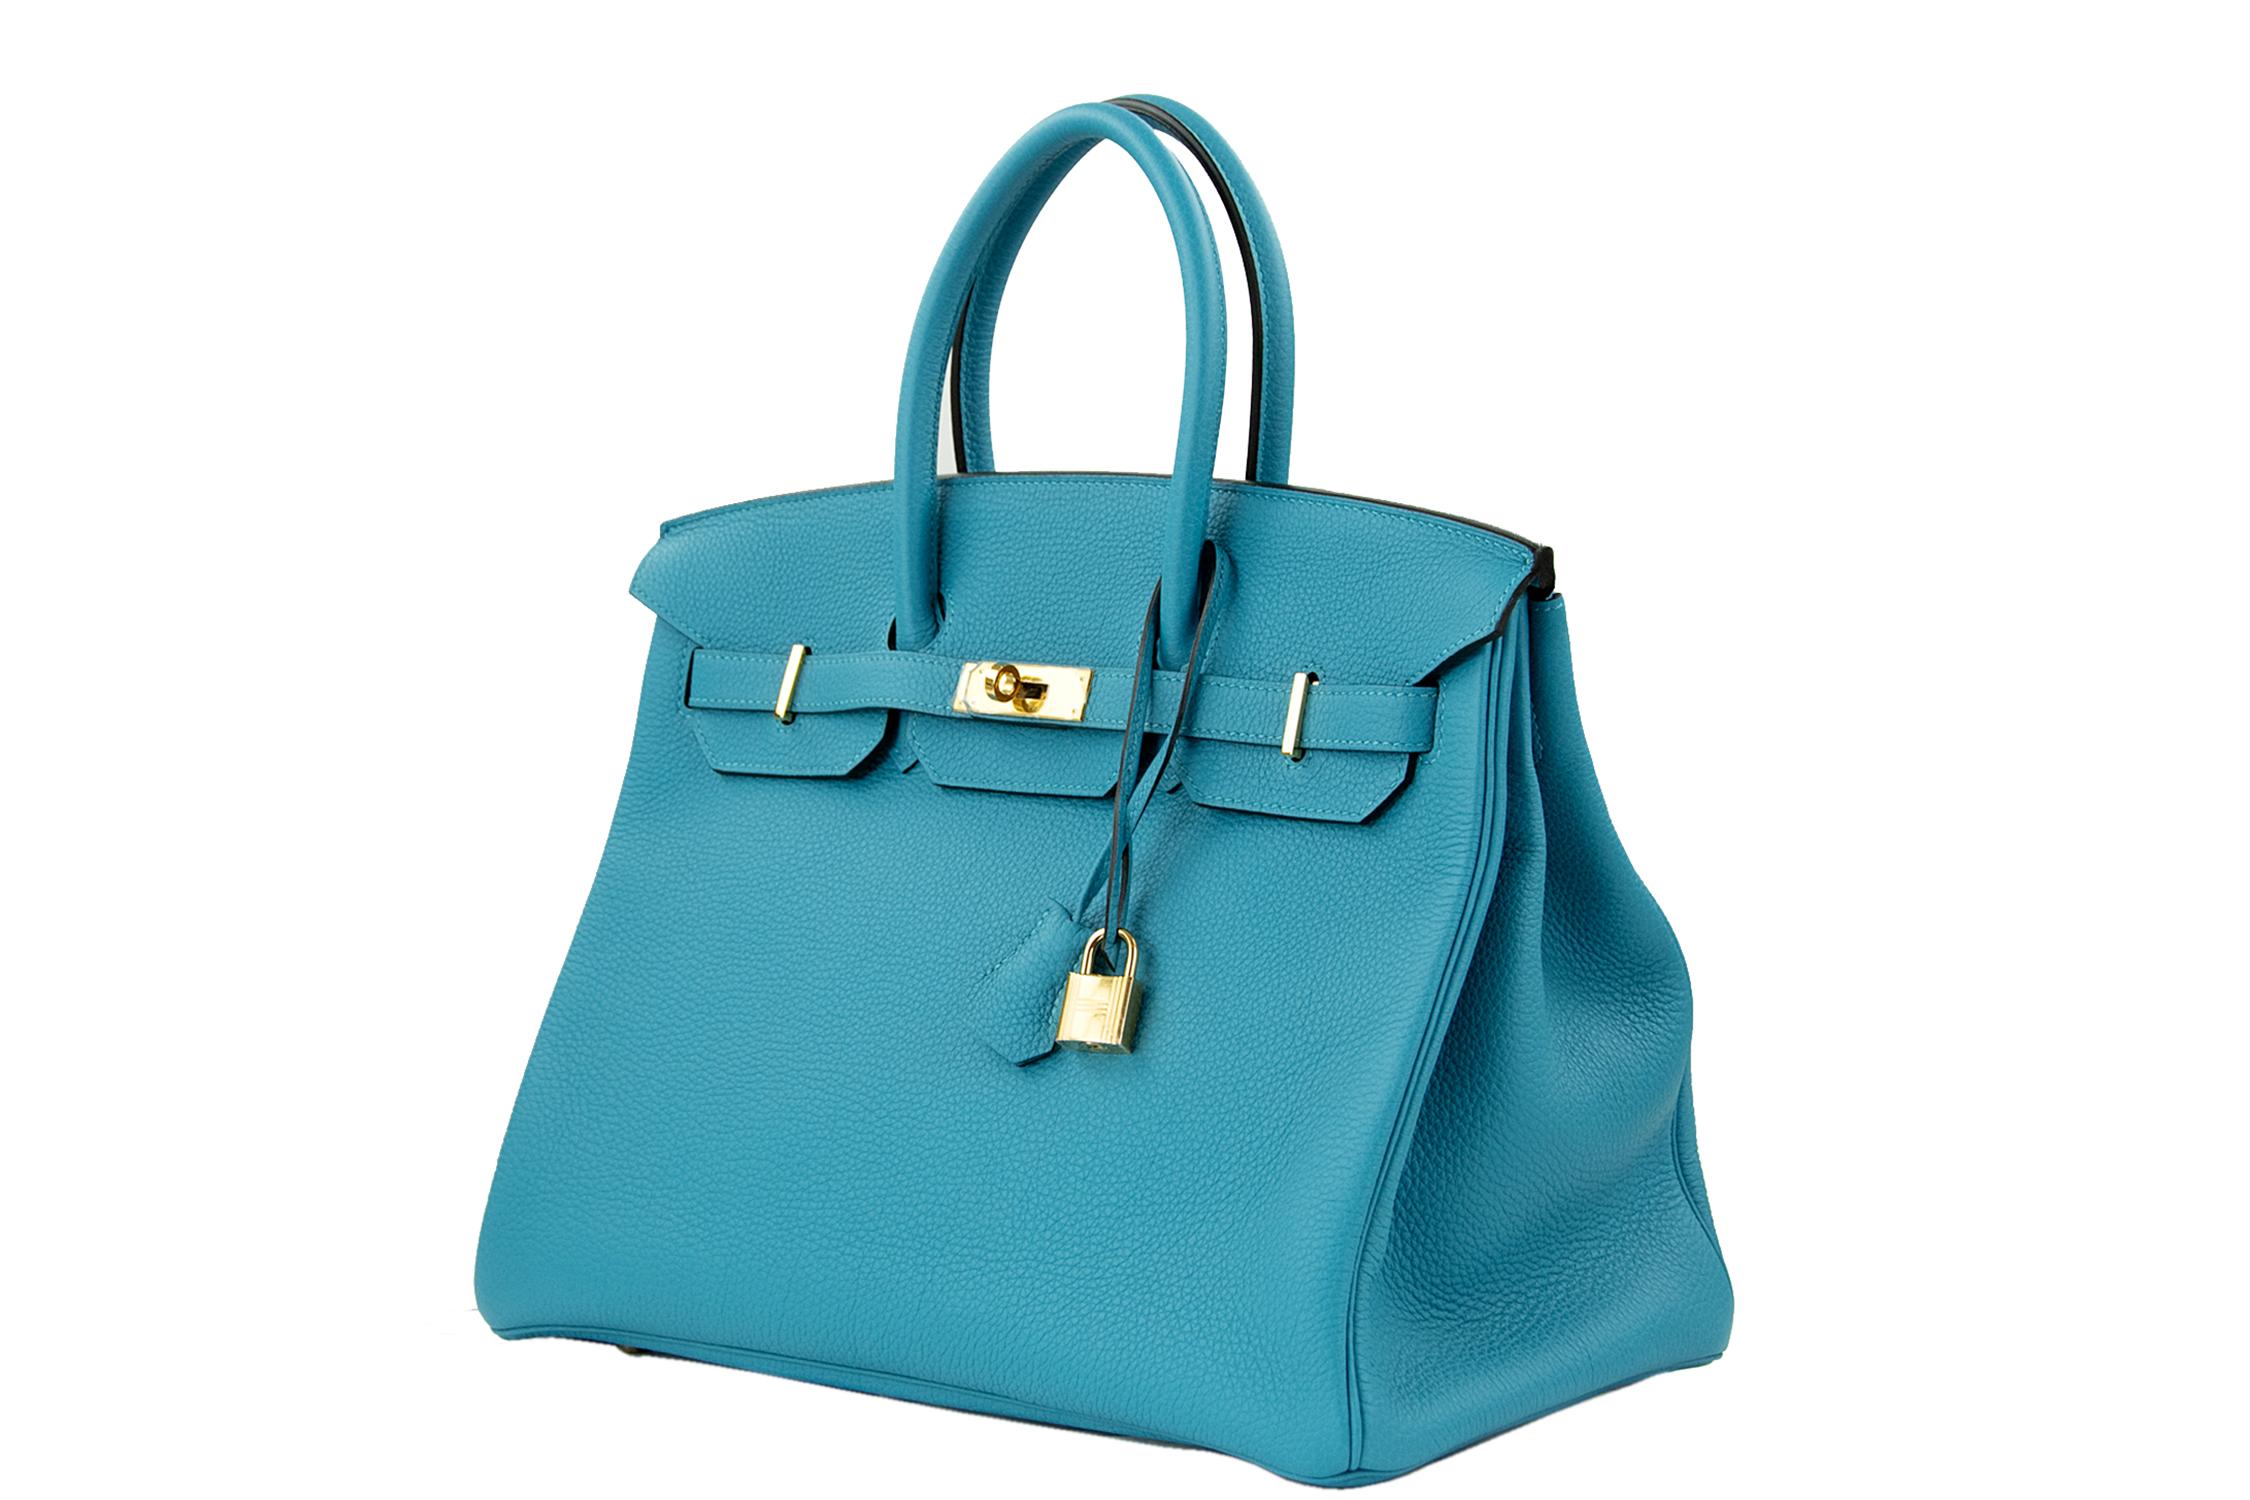 Hermes Birkin 35cm Bright Blue Clemence GHW In Excellent Condition For Sale In Newport, RI